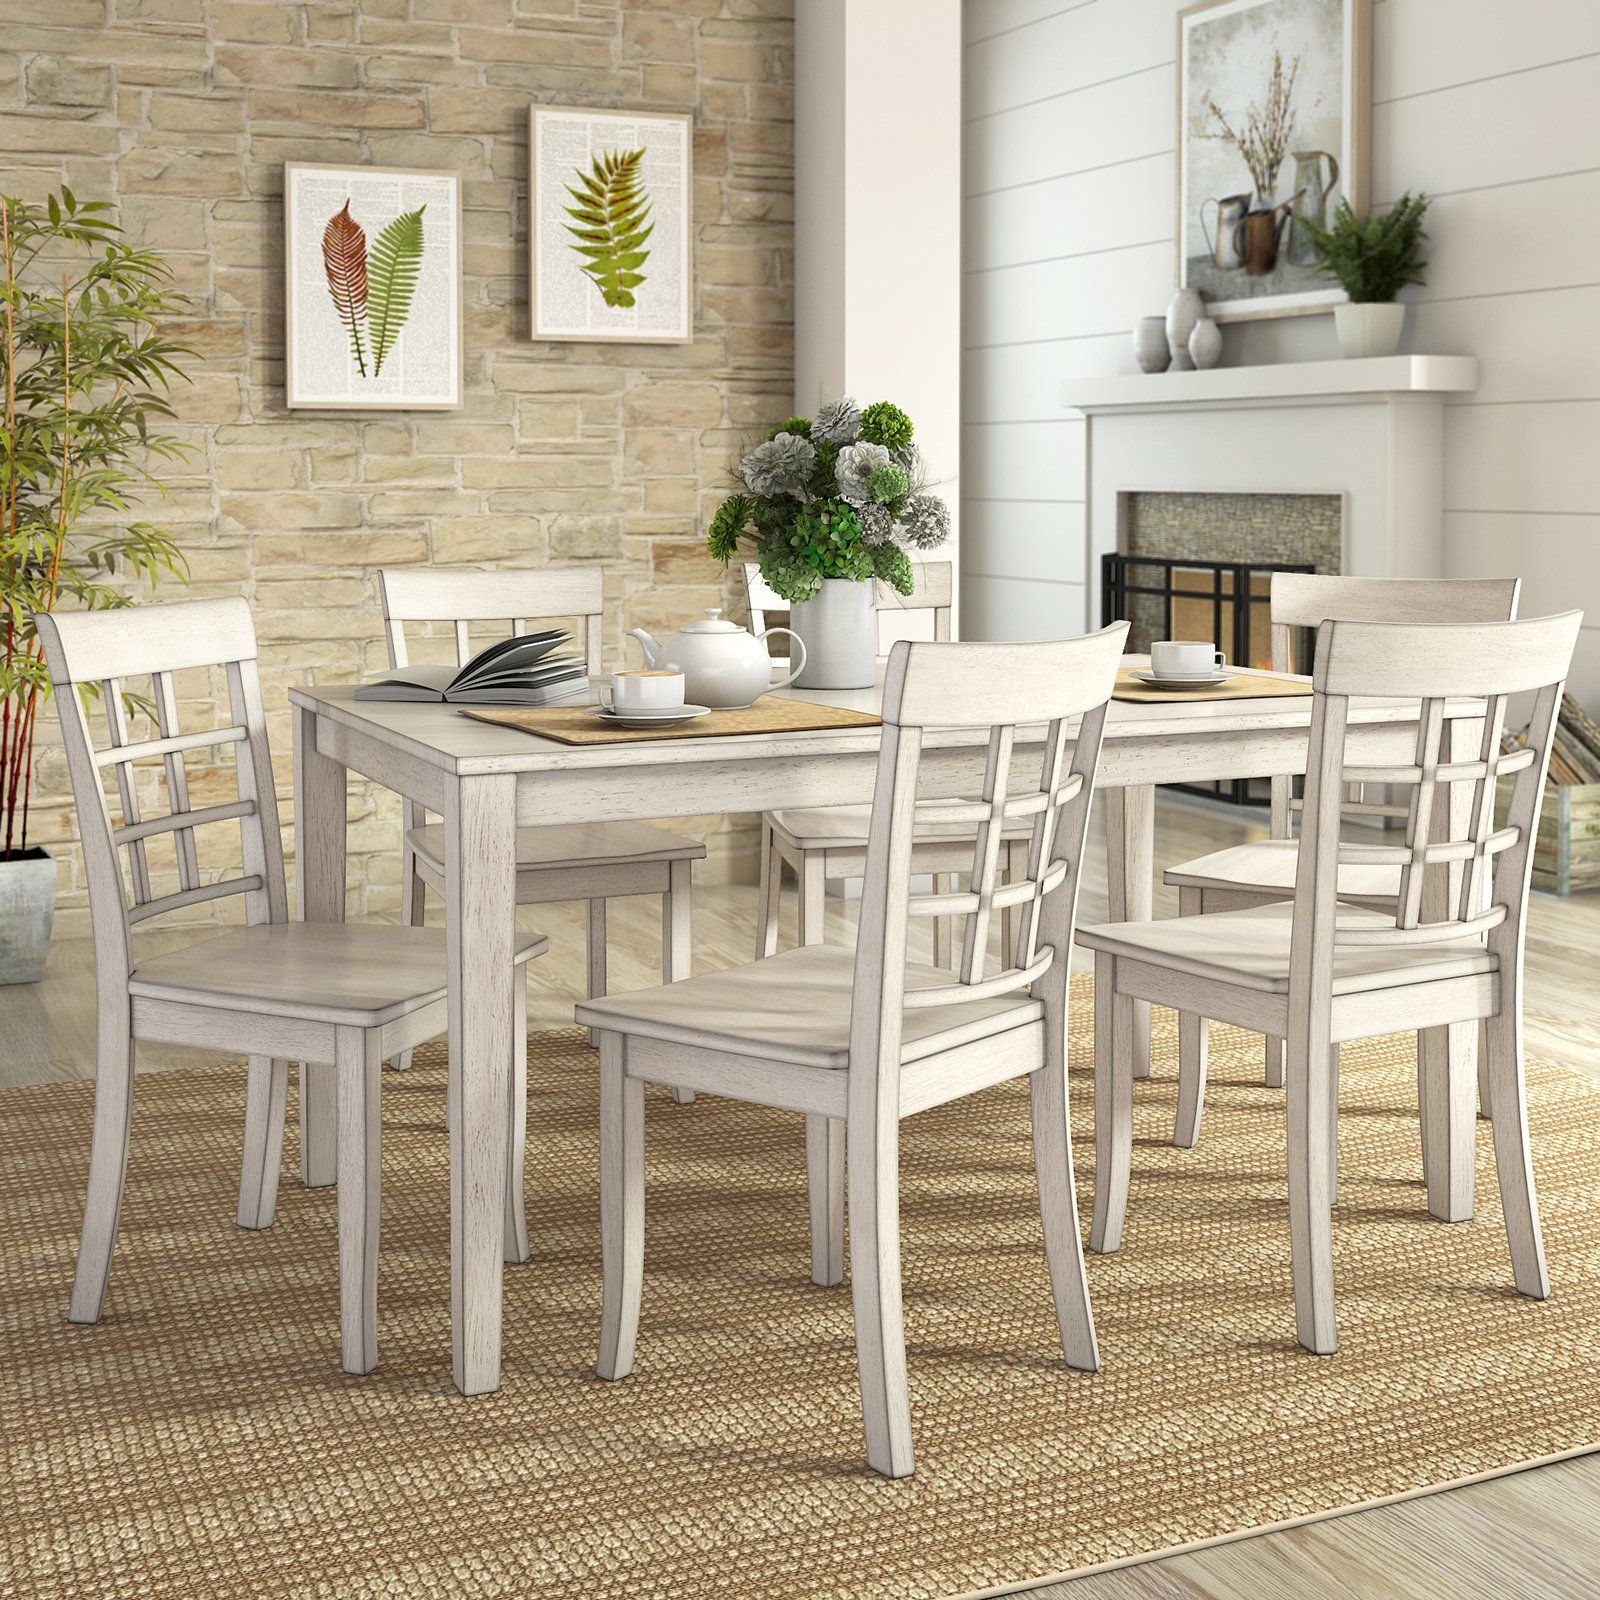 Lexington Large Wood Dining Set With 6 Window Back Chairs, White Within White Wood Soutdoor Seating Sets (View 13 of 15)